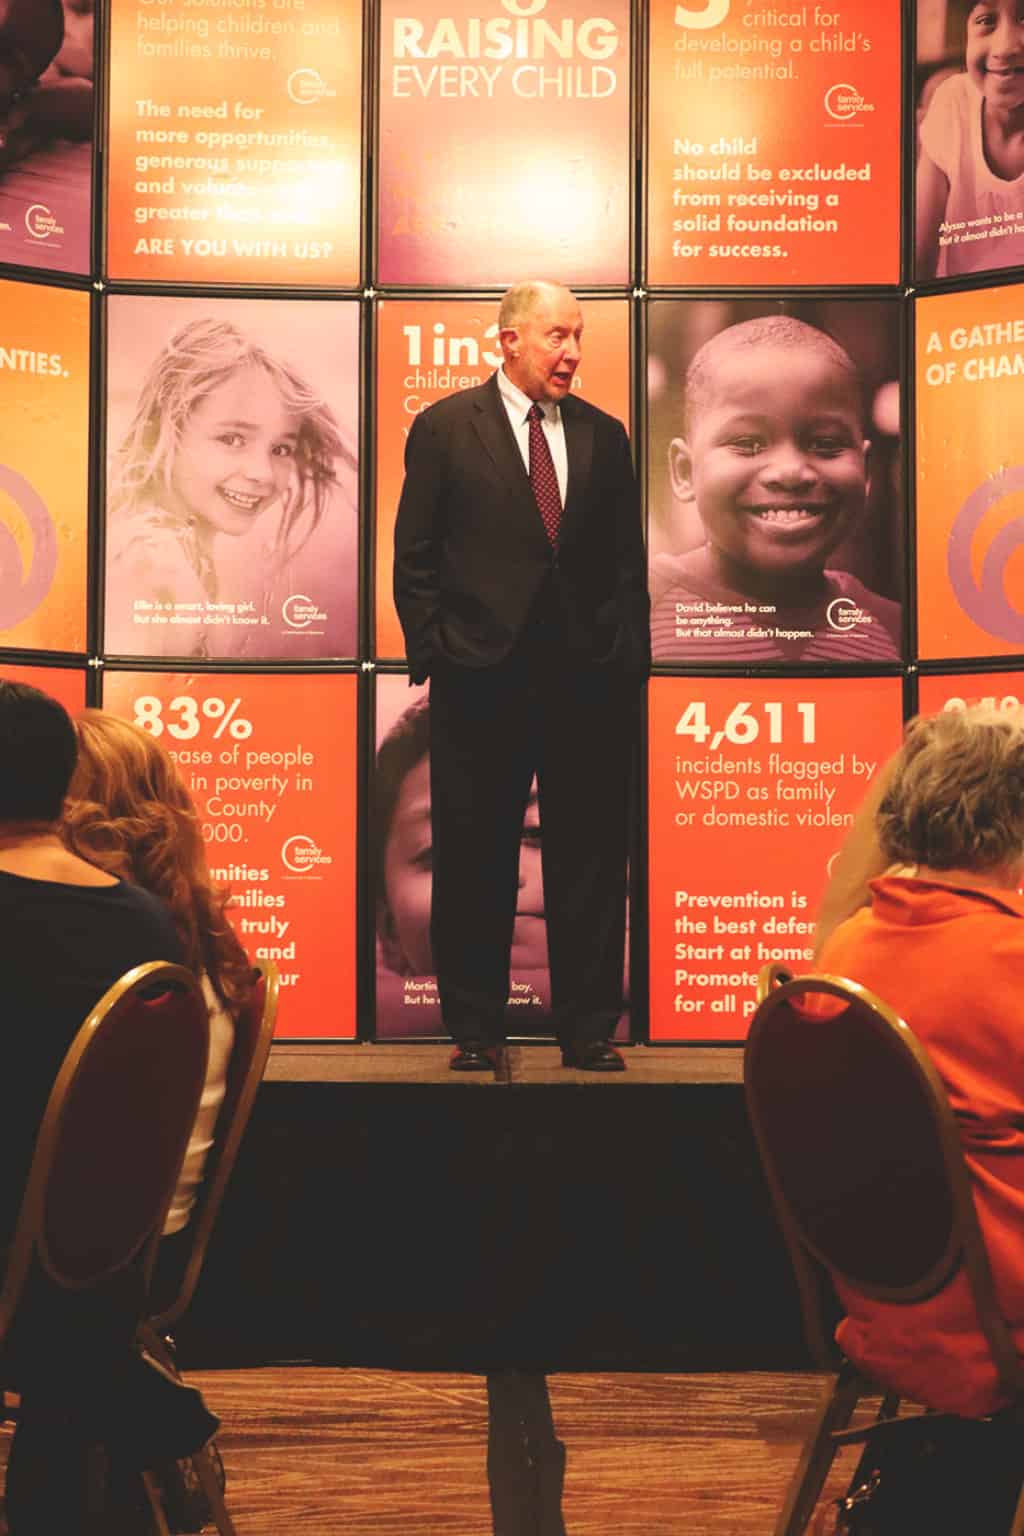 Robert Putnam speaking at the Family Services' Raising Every Child event in Winston-Salem. (Photo credit: Todd Brantley/Education NC)